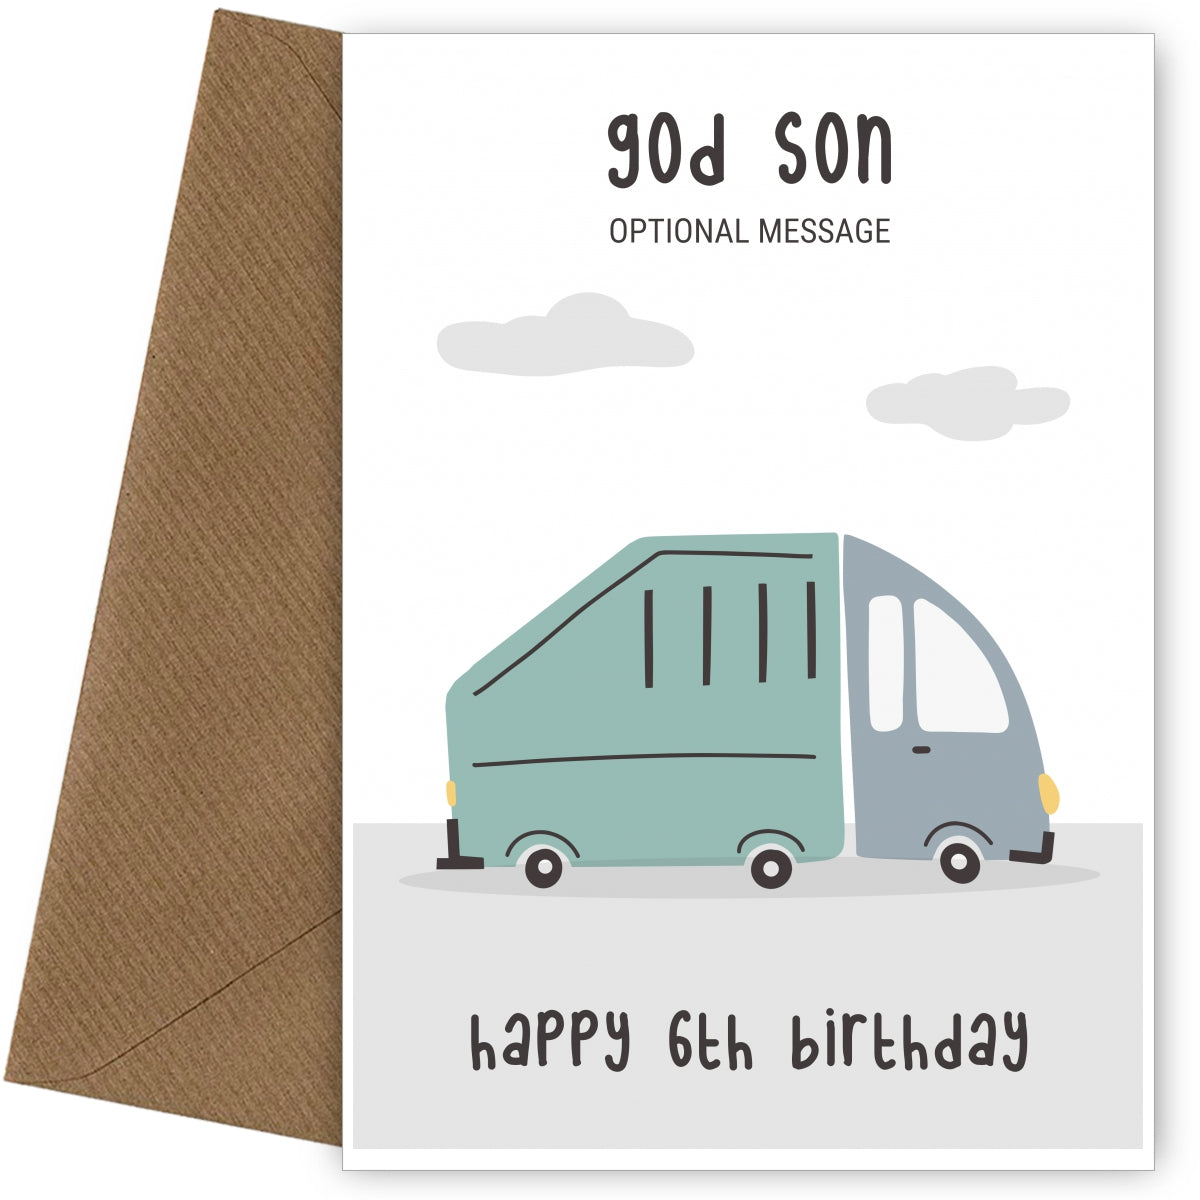 Fun Vehicles 6th Birthday Card for God Son - Garbage Truck